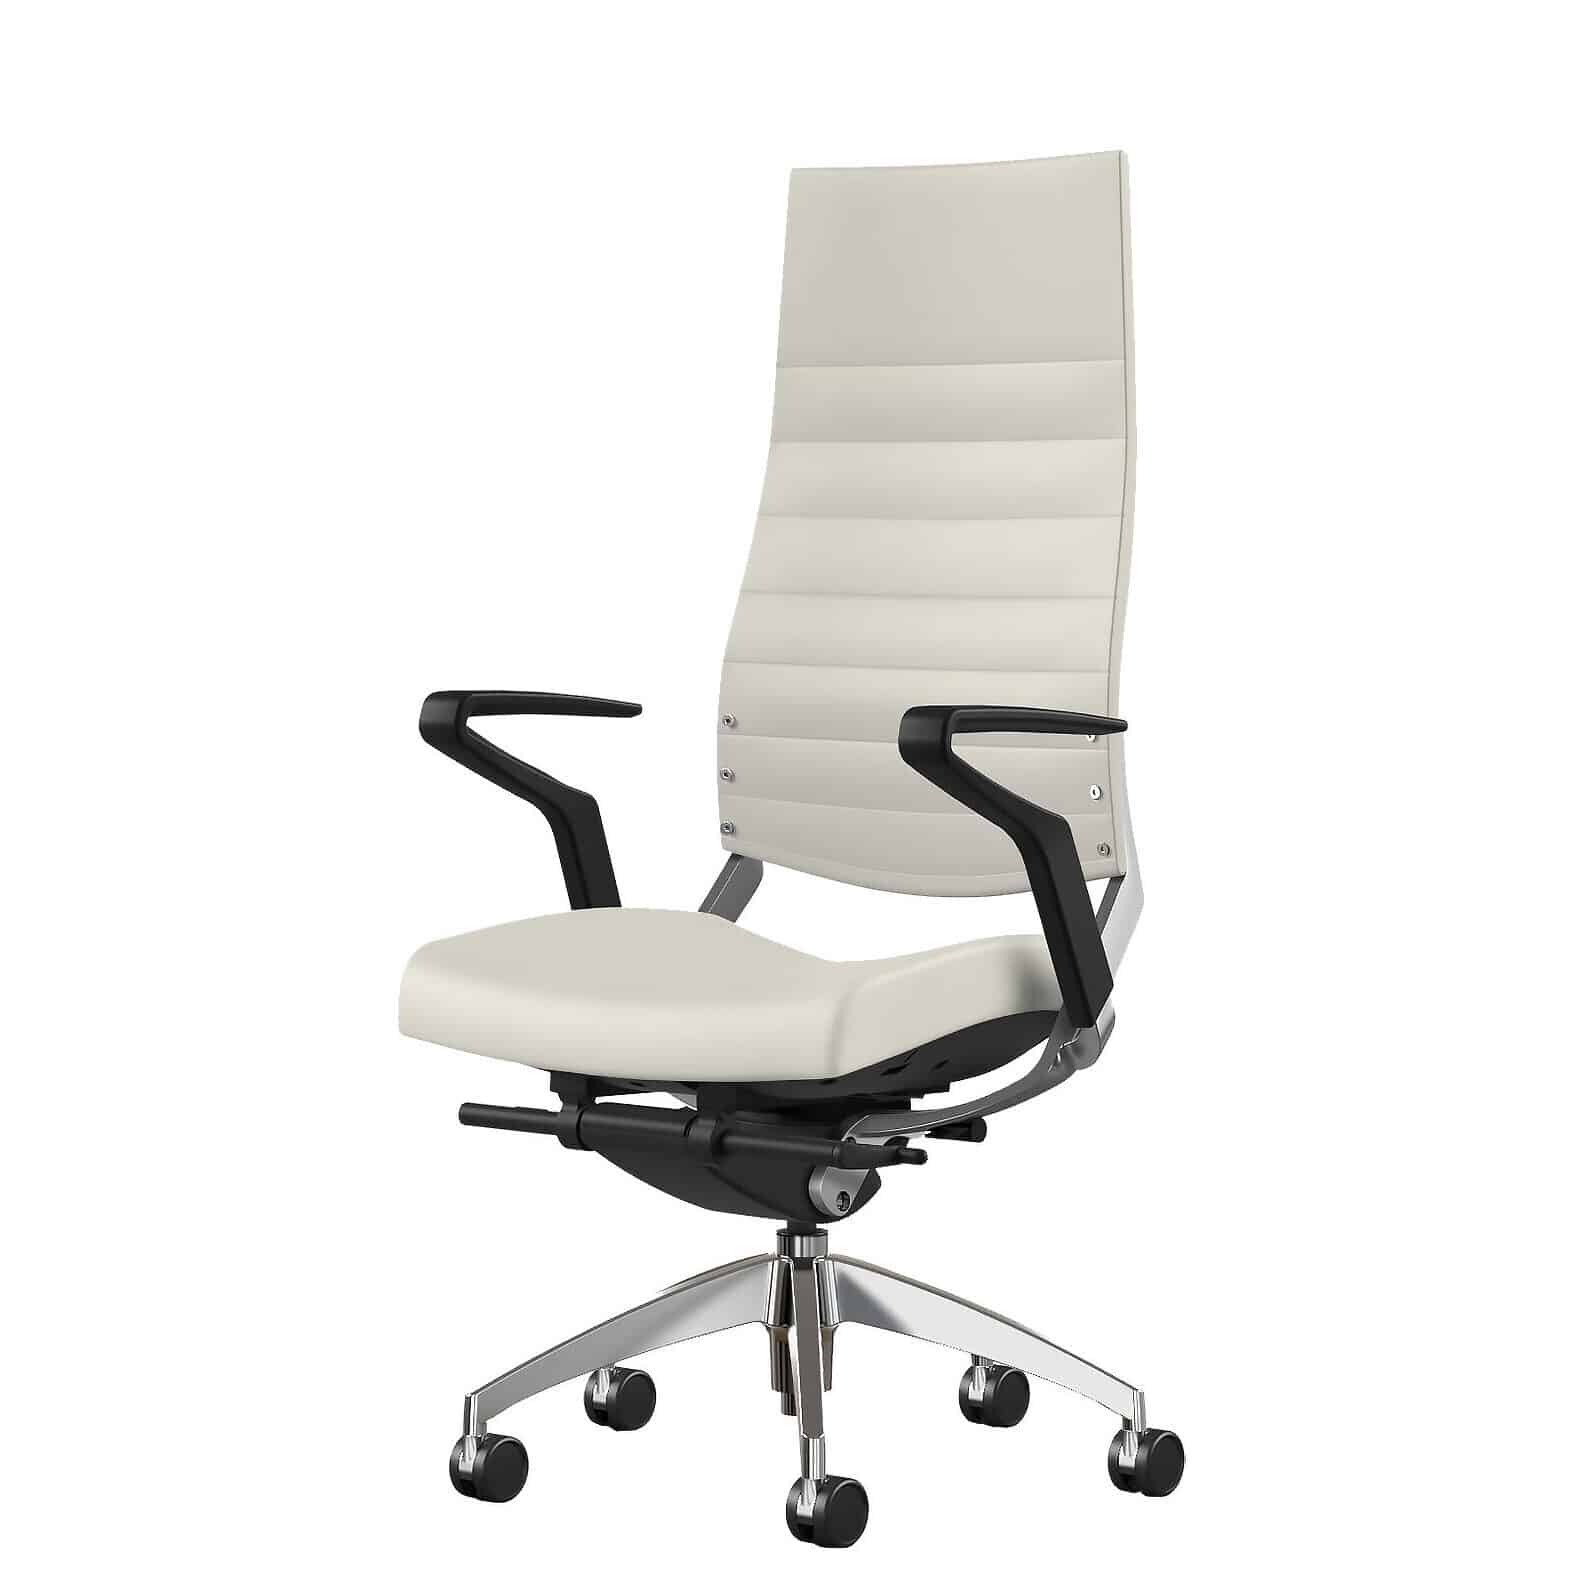 A modern and ergonomic executive chair with adjustable lumbar support and a polished aluminum base.